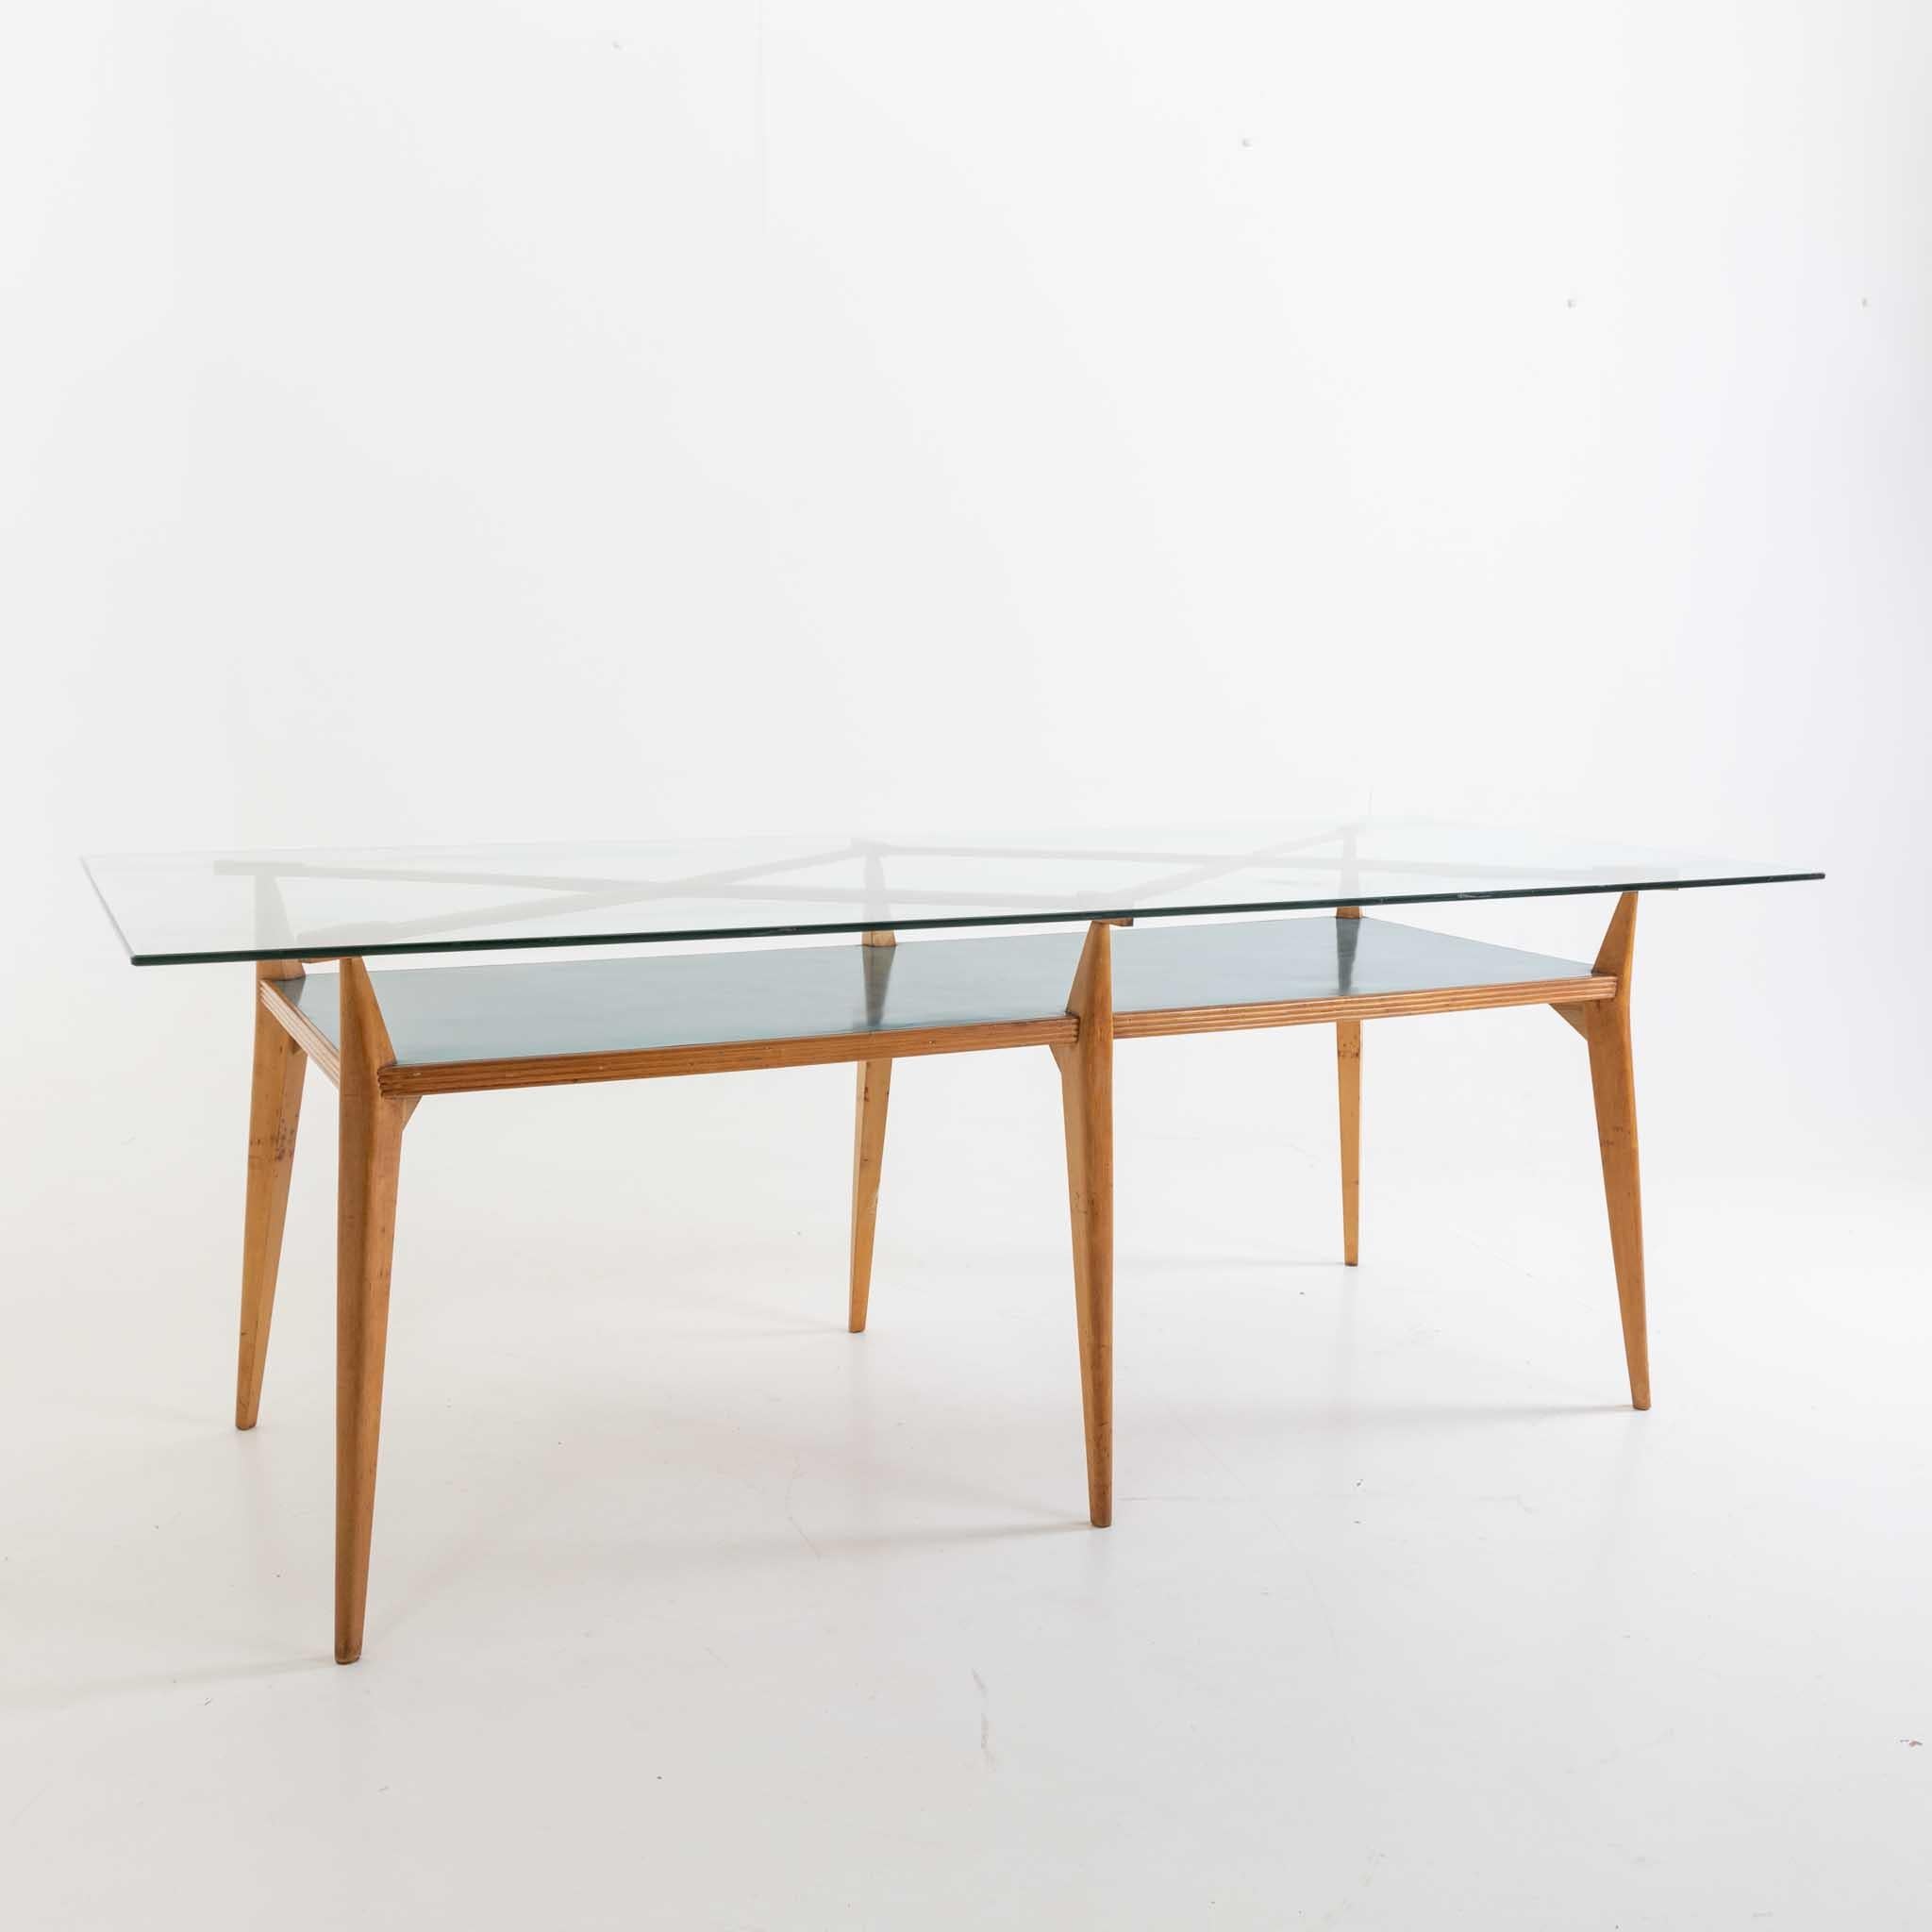 Table standing on six conical legs with glass top and diamond-shaped bracing over the blue-laminated tabletop. The table was designed in the mid-20th century for a studio by architect Vittorio Armellini. The original plans are available. The table